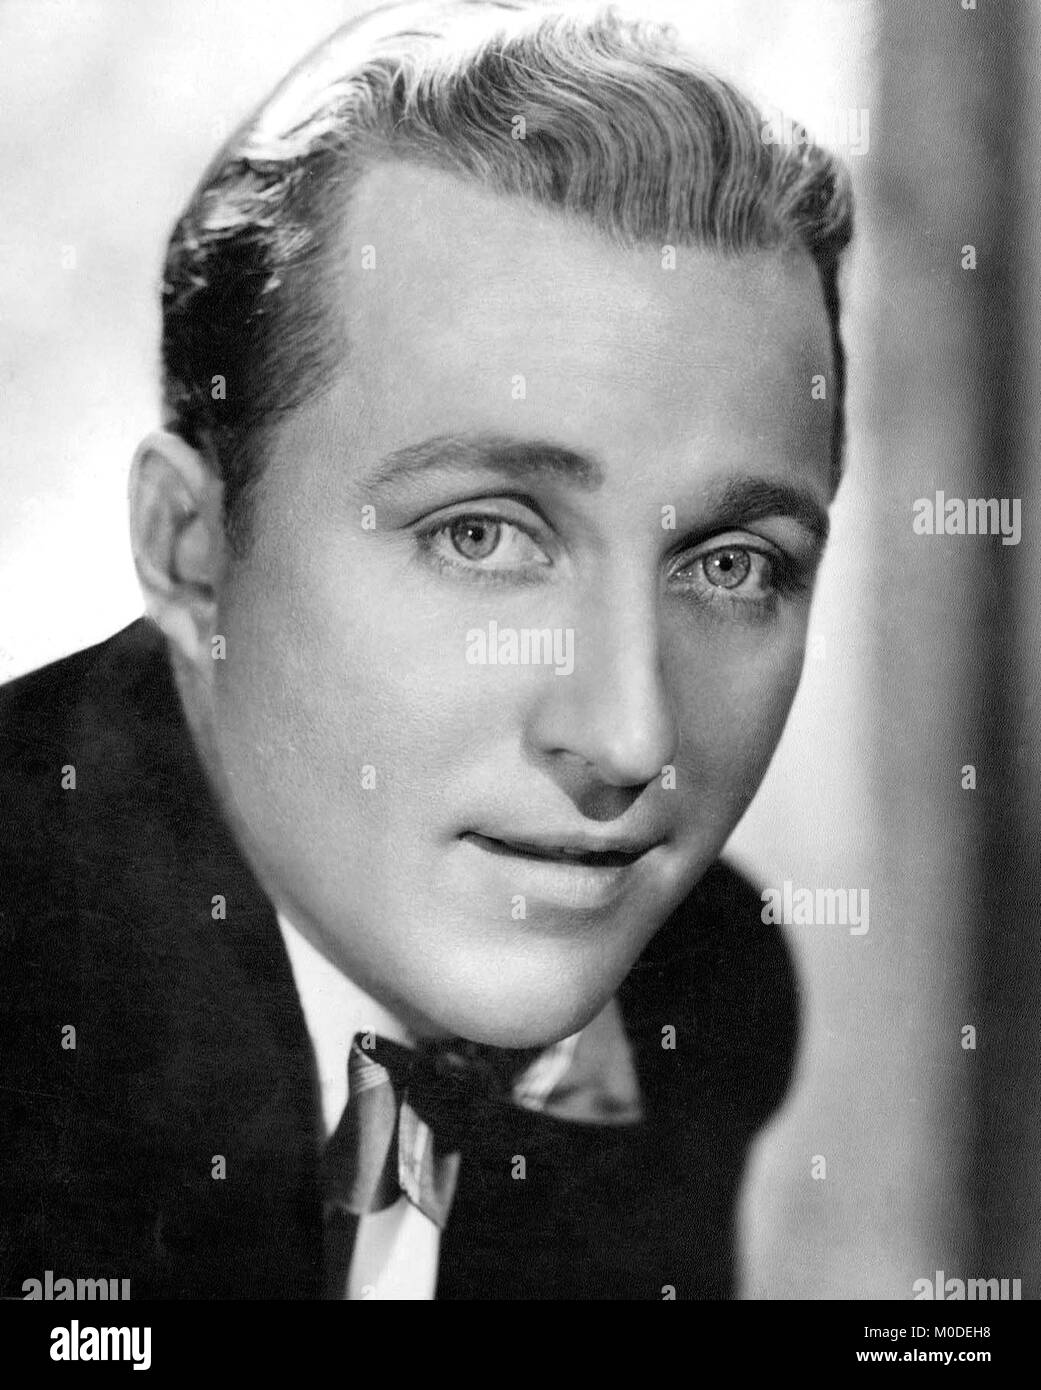 Bing Crosby (1903-1977), publicity photo of the American singer from the 1930s Stock Photo